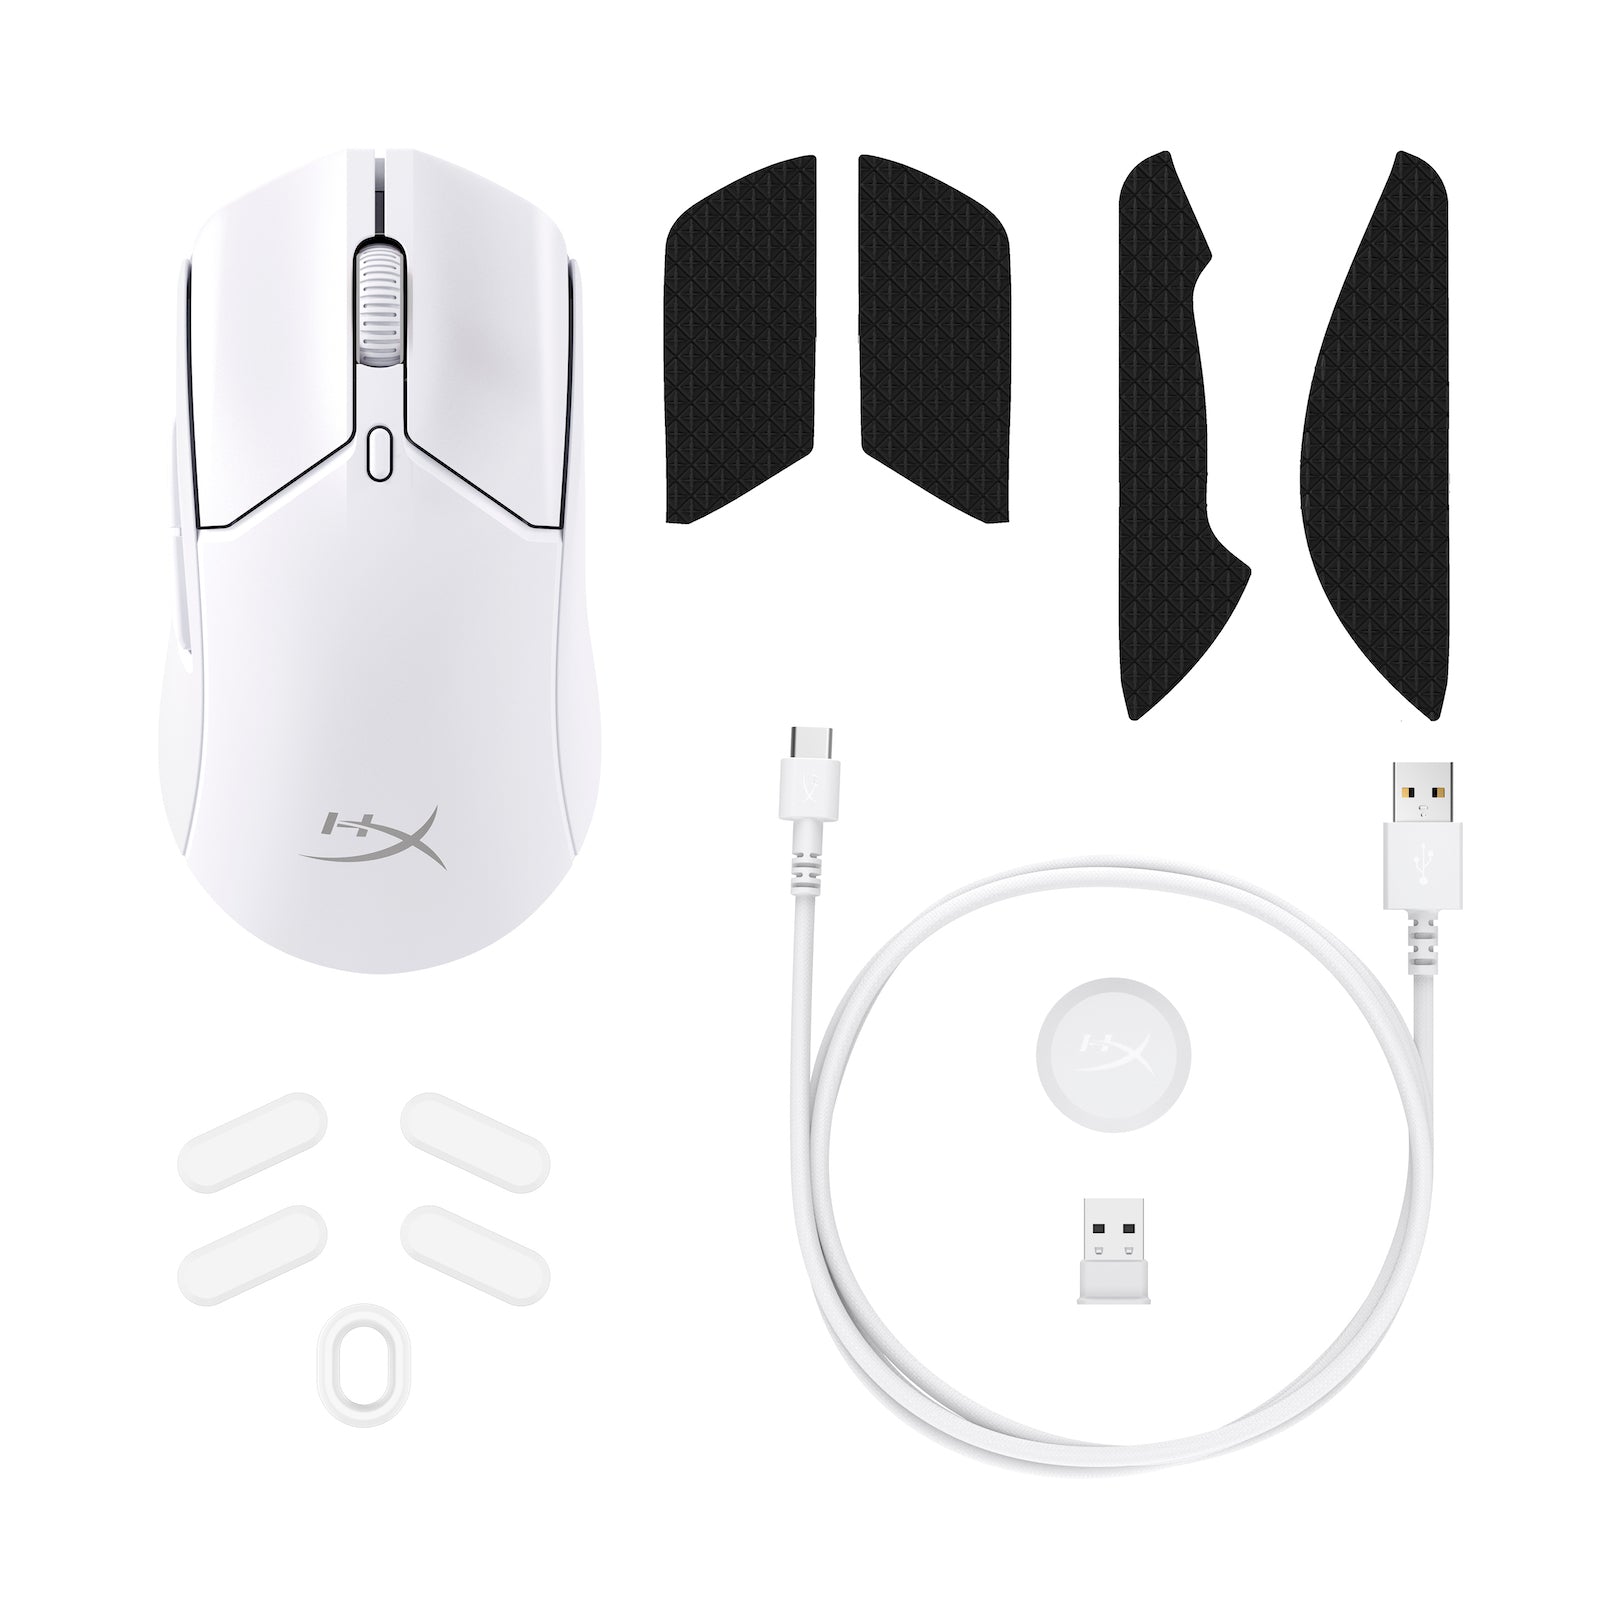 HyperX Pulsefire Haste 2 Wireless White Gaming Mouse accessories